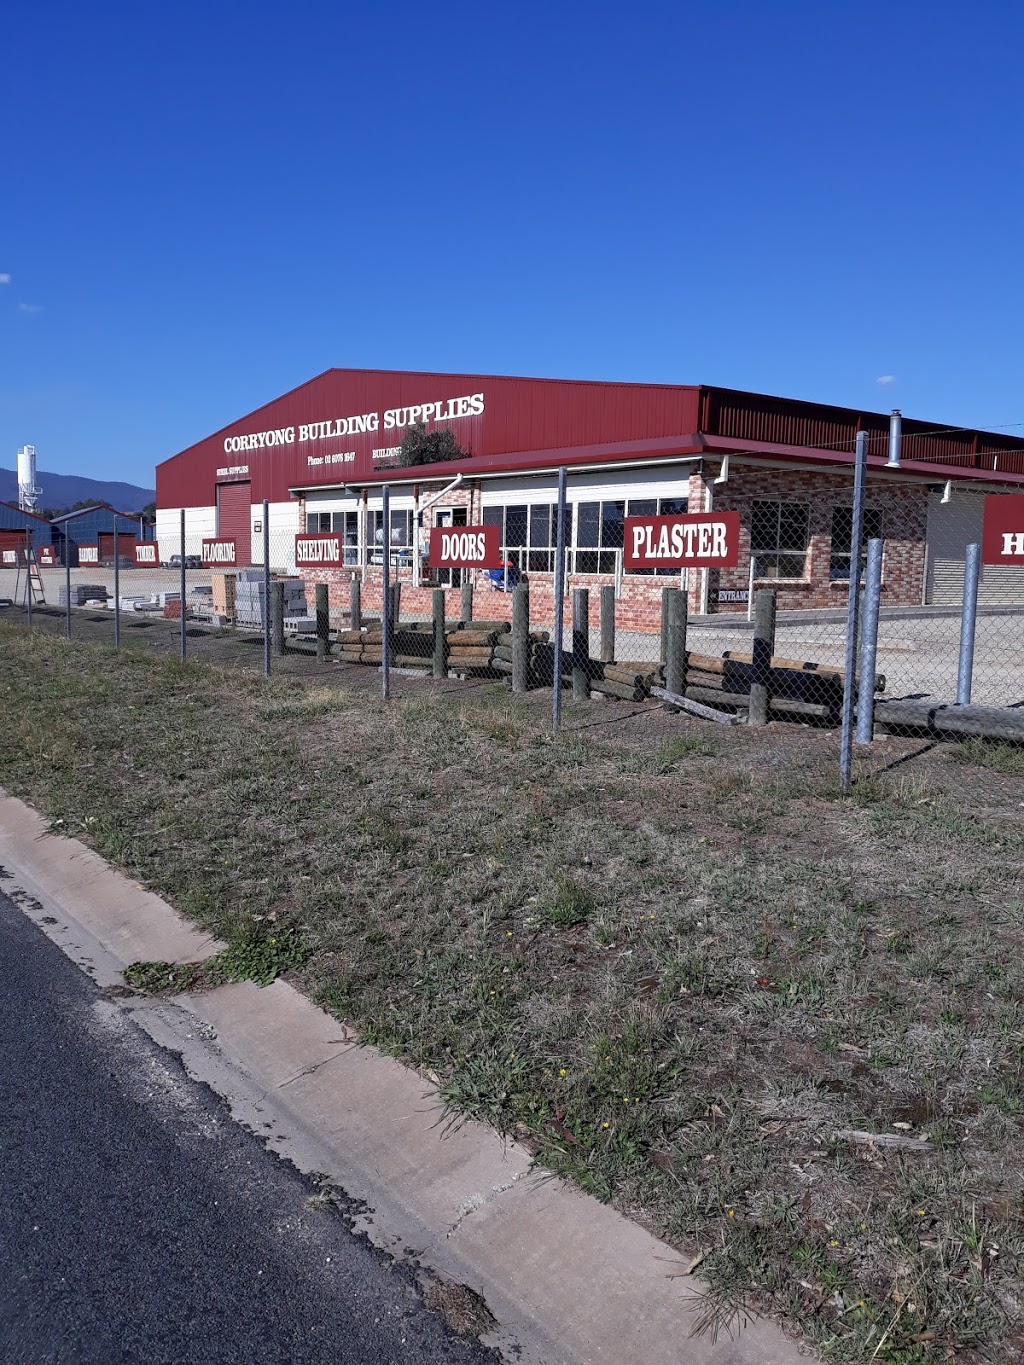 Corryong Building Supplies | store | 1 Boundary St, Corryong VIC 3707, Australia | 0260761647 OR +61 2 6076 1647